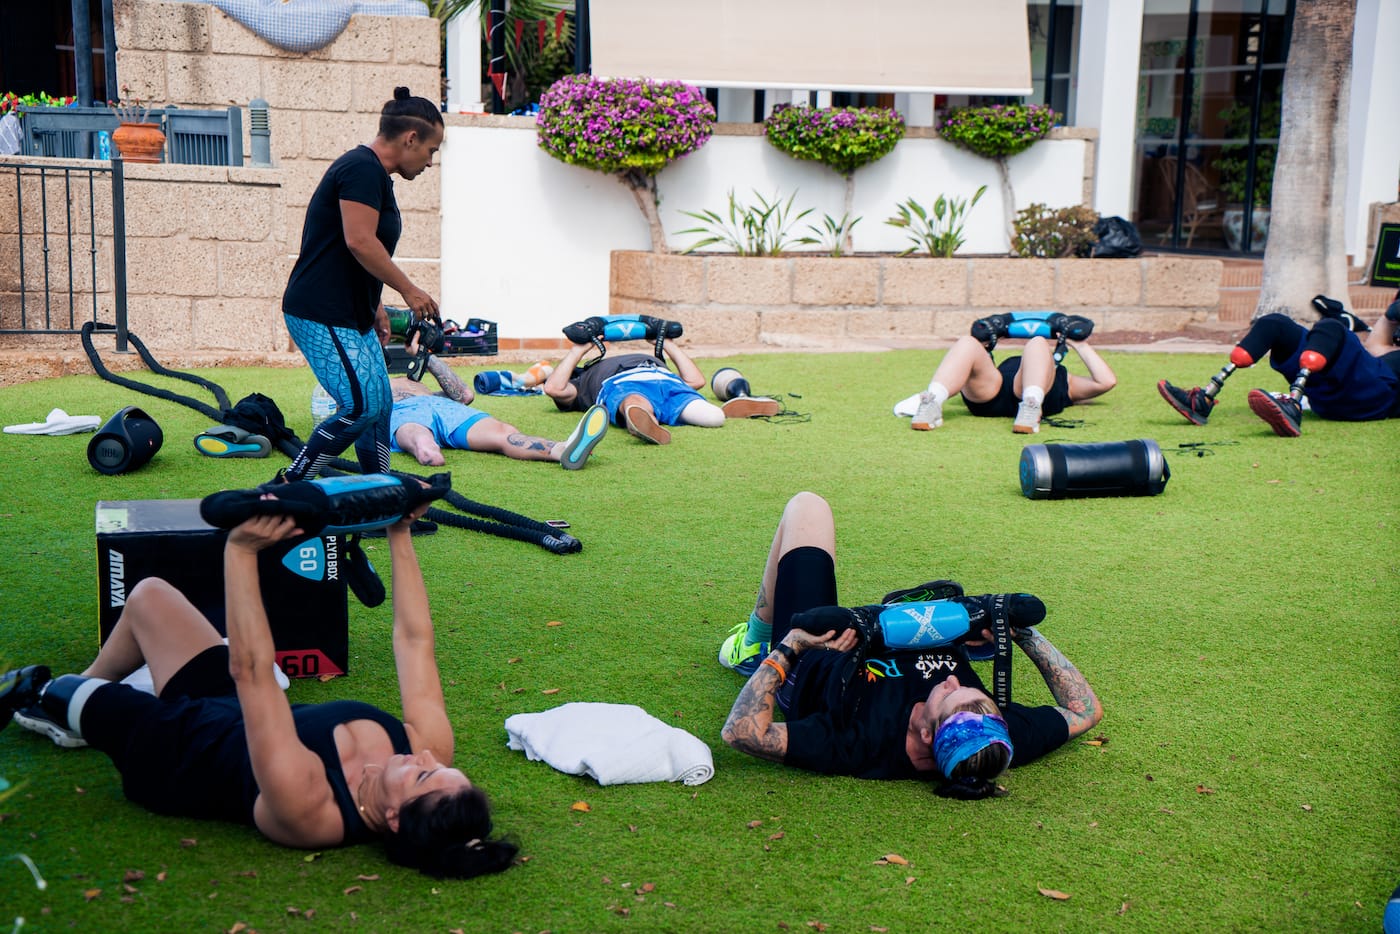 Luxury fitness boot camp in Spain